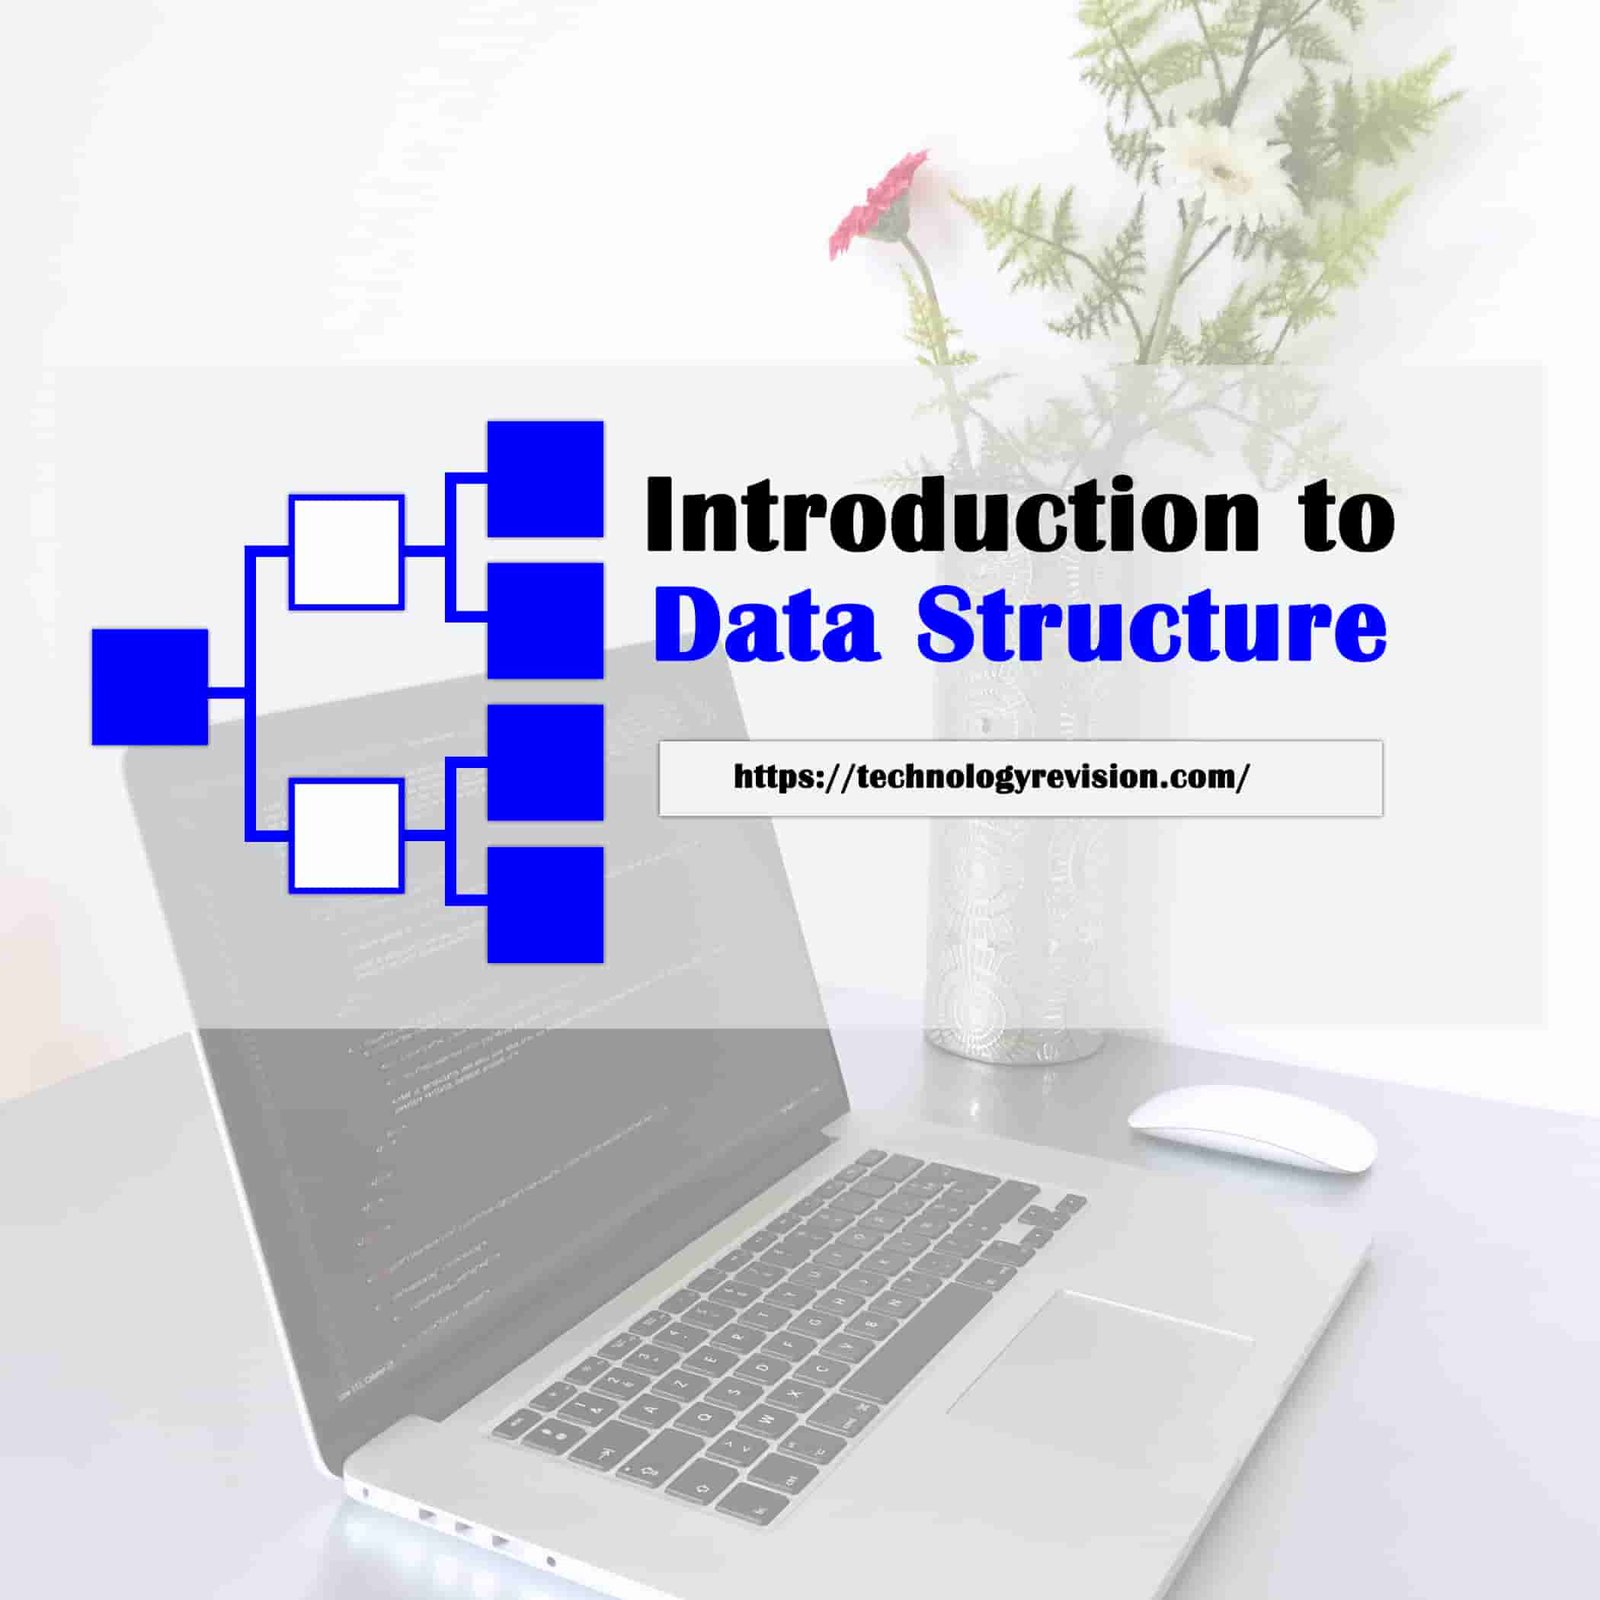 Introduction to Data Structure - Technology Revision